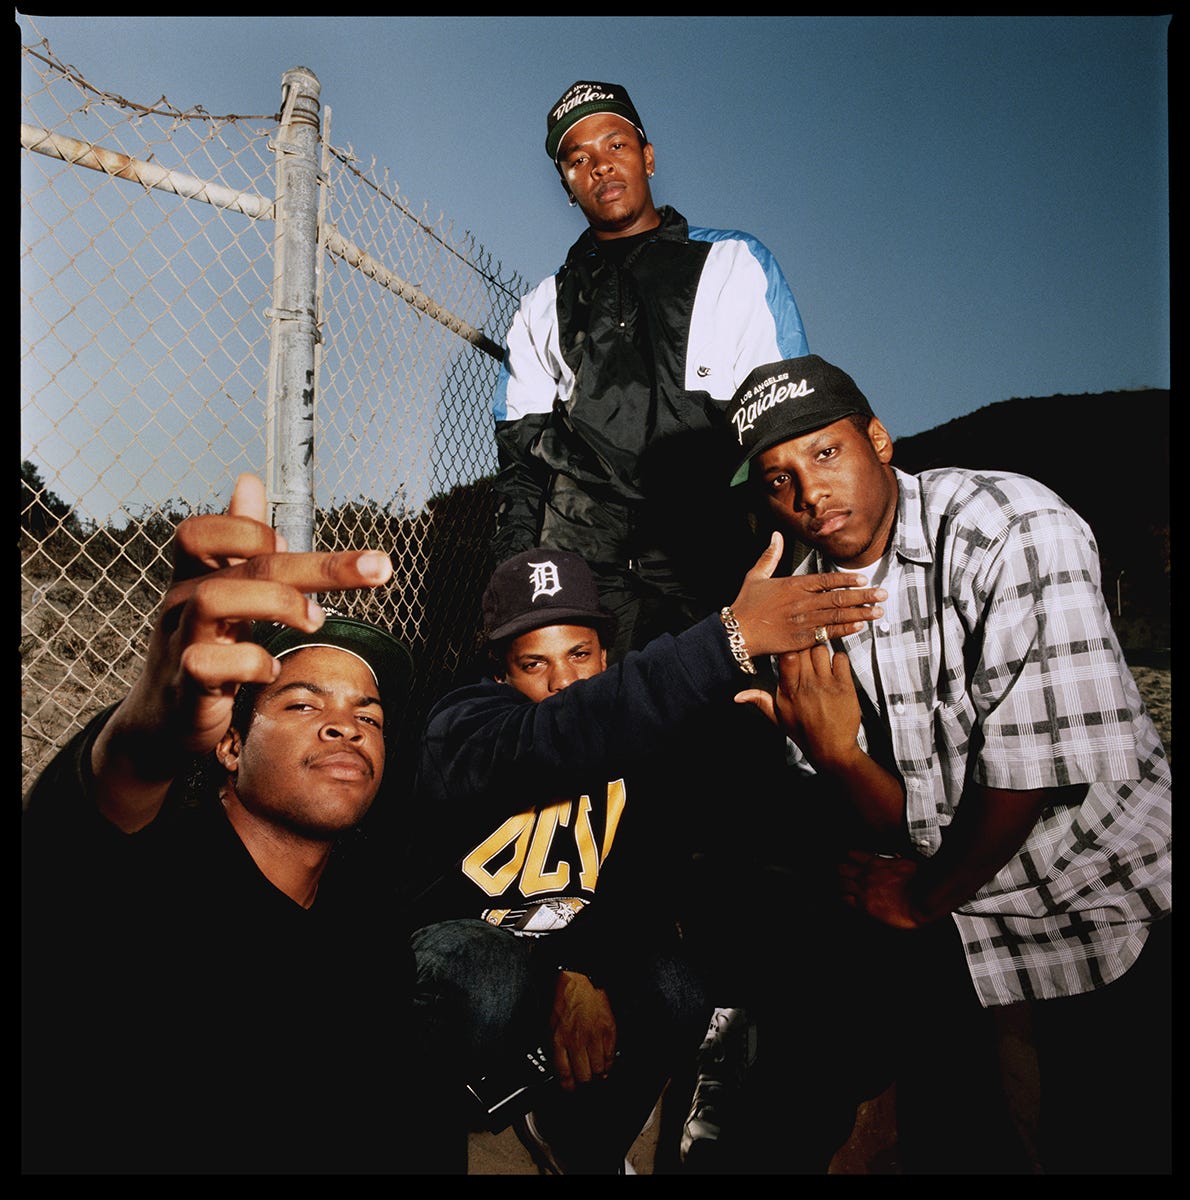 Straight Outta Compton. I write this on September 7th, what… | by Matthew  Amha | Medium